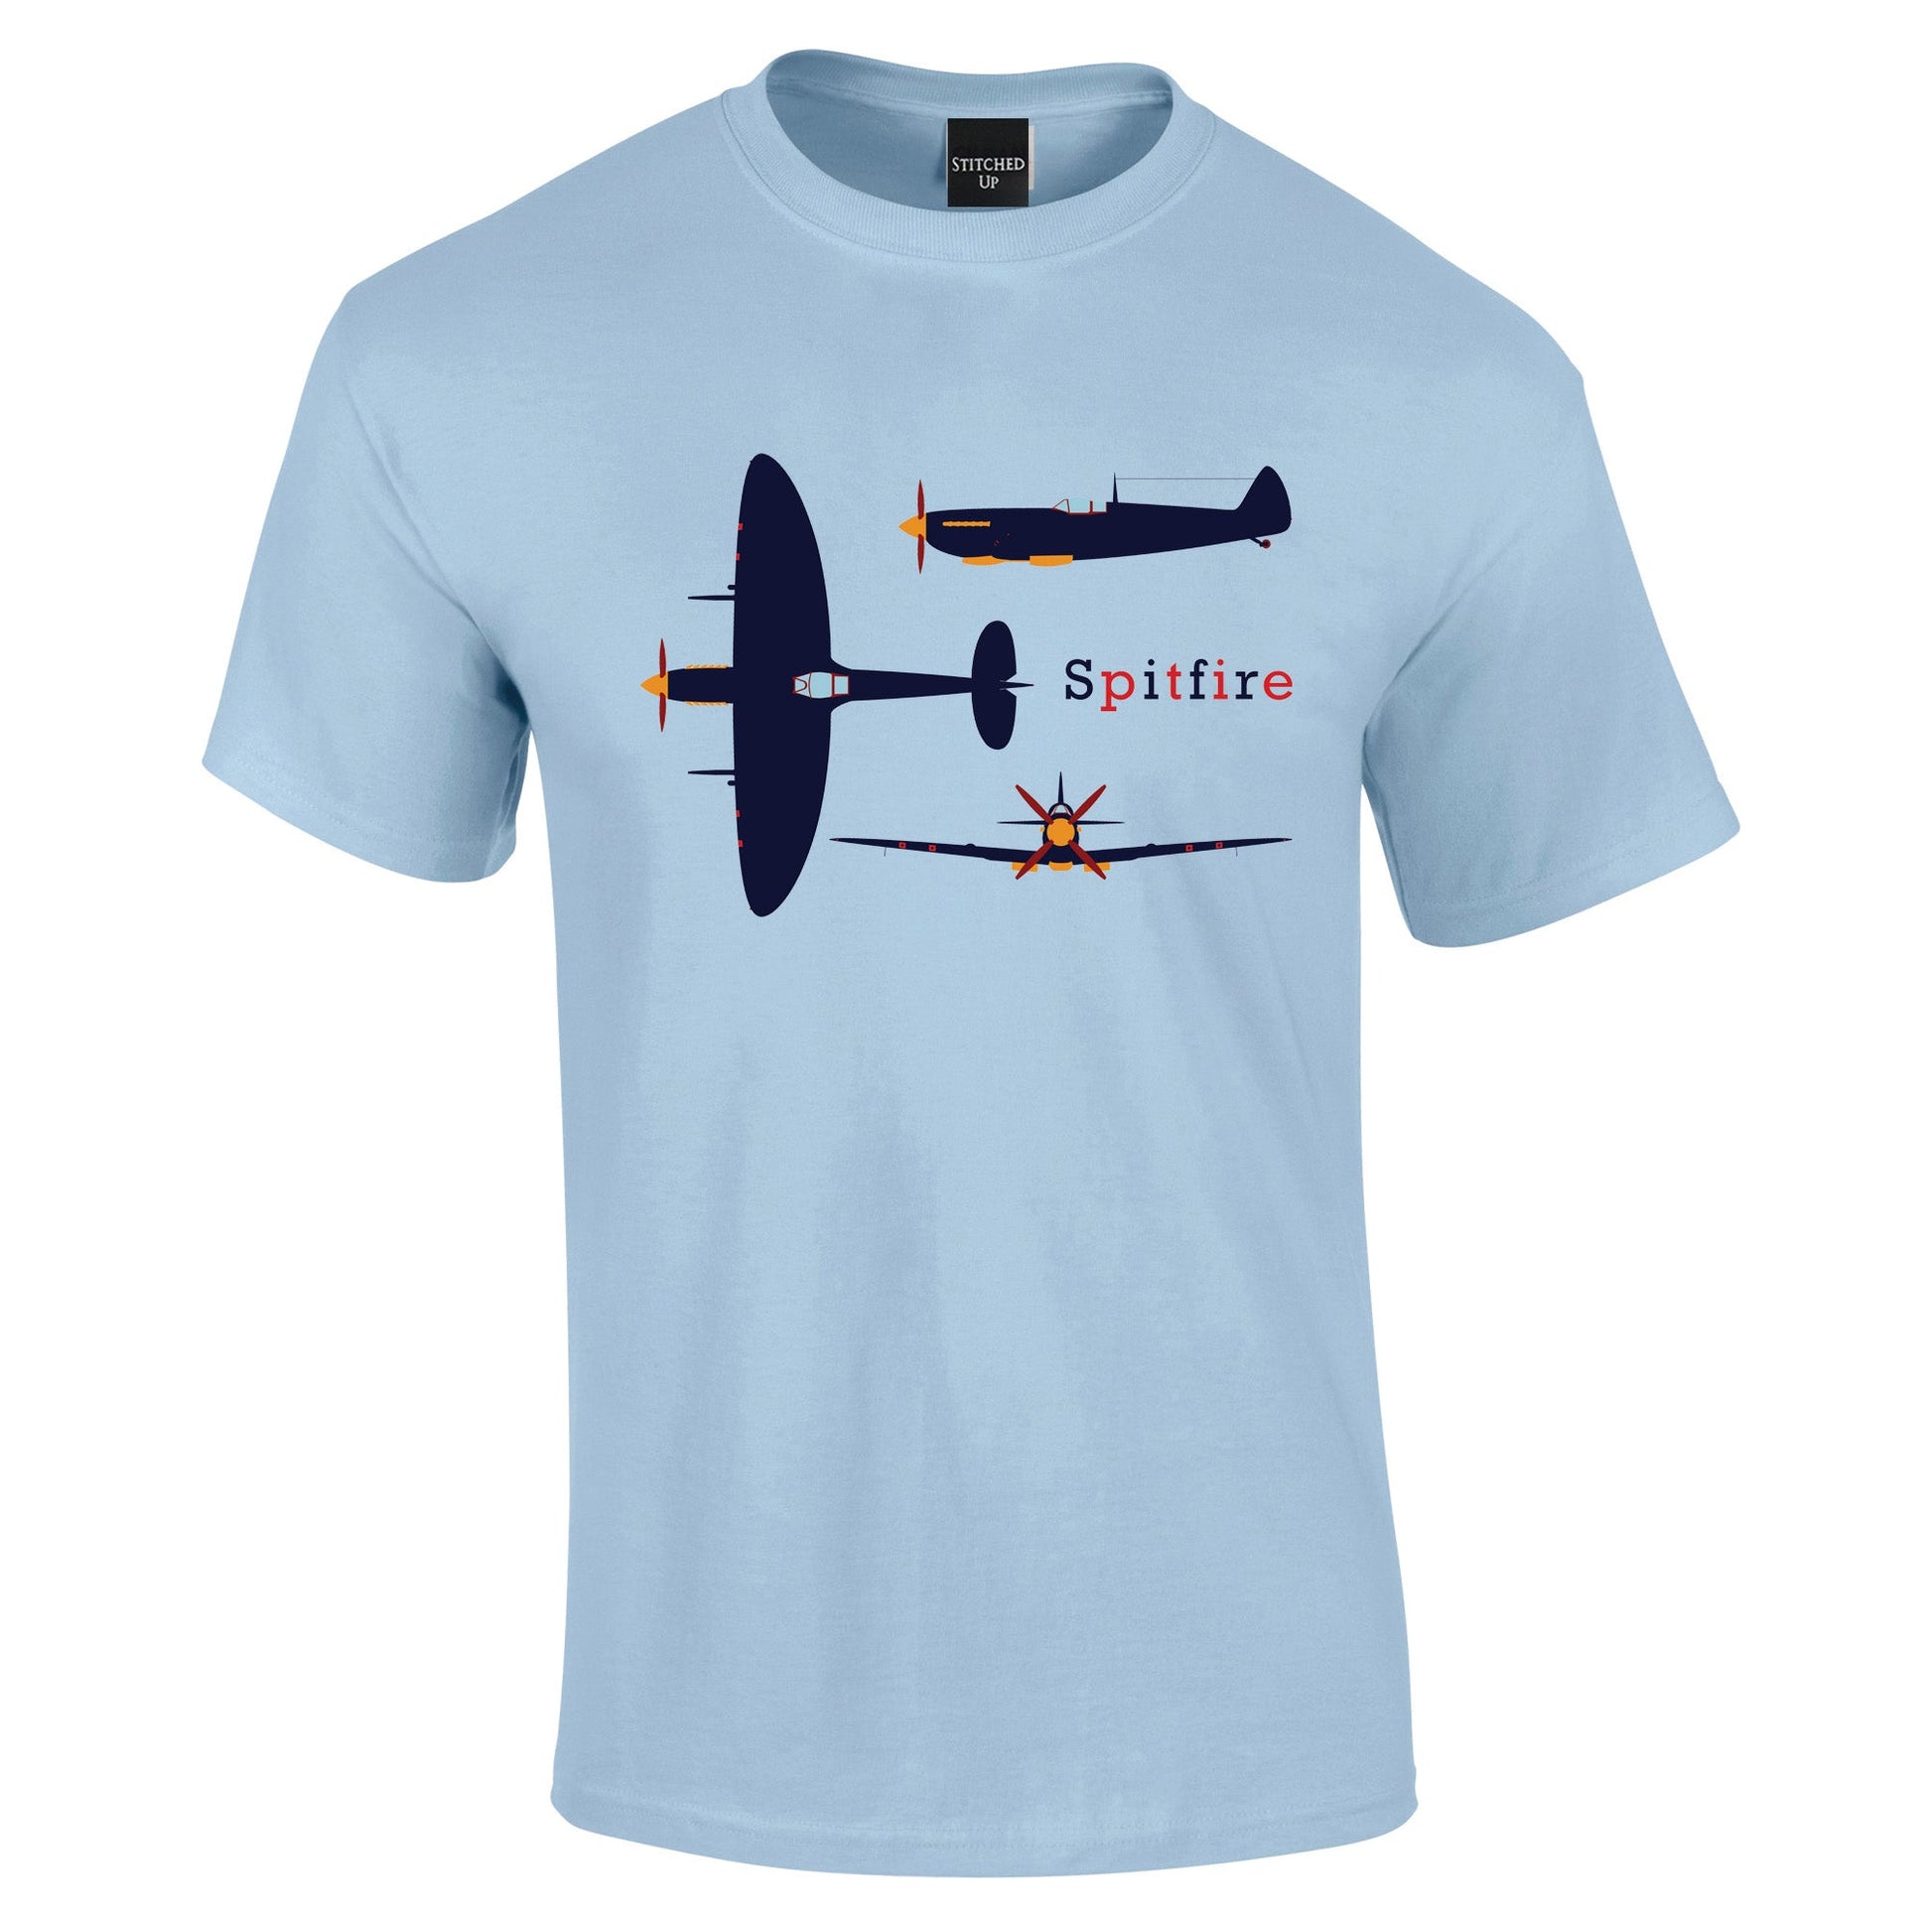 Spitfire profile T-Shirt by AvAddicts – Funky Aviation